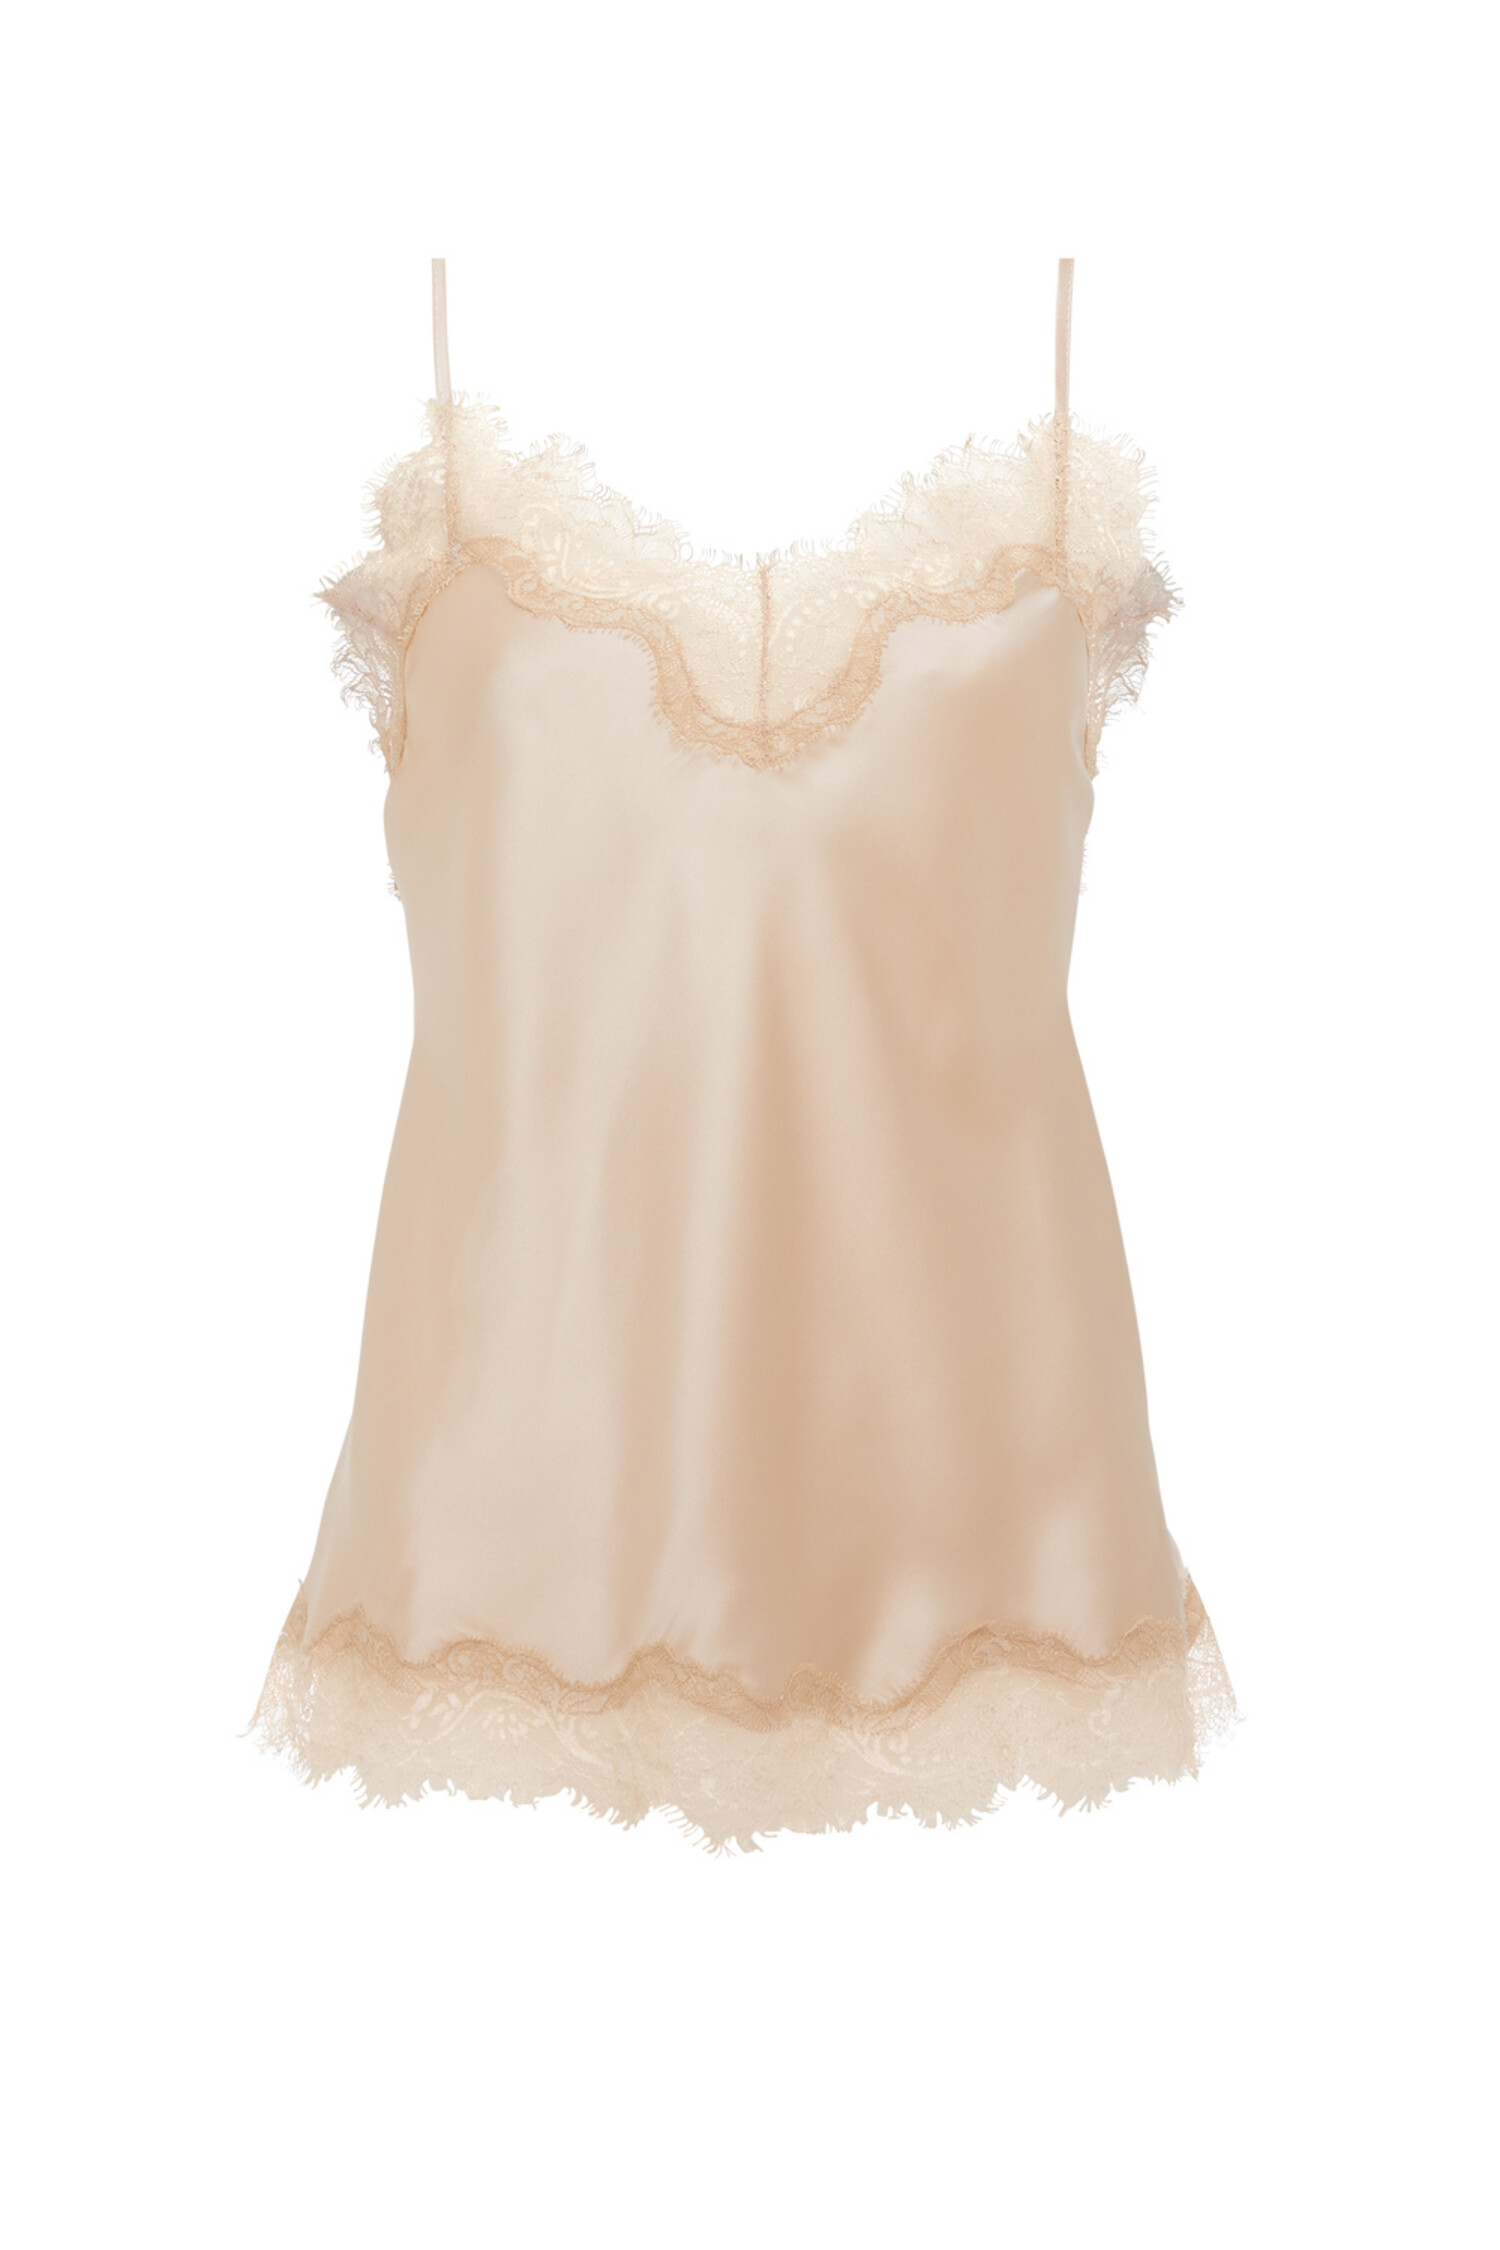 Silk Camisole L31002 Shell/Vintage - Lace & Day